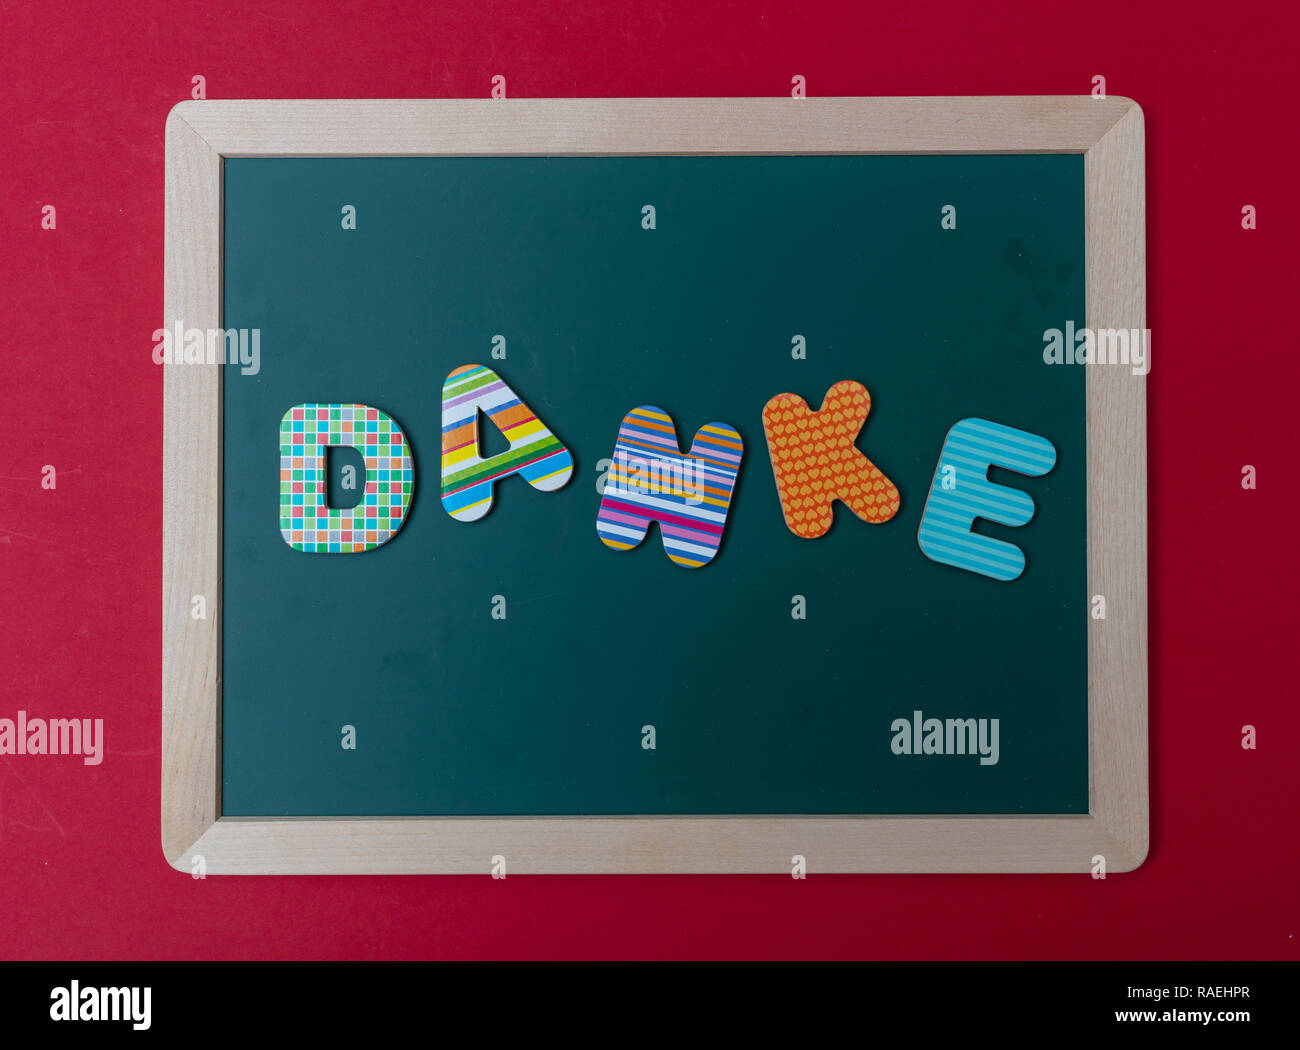 Danke, thank you, Colorful letters shaping the word Danke, thank you in german, on green board with wooden frame, red wall background Stock Photo